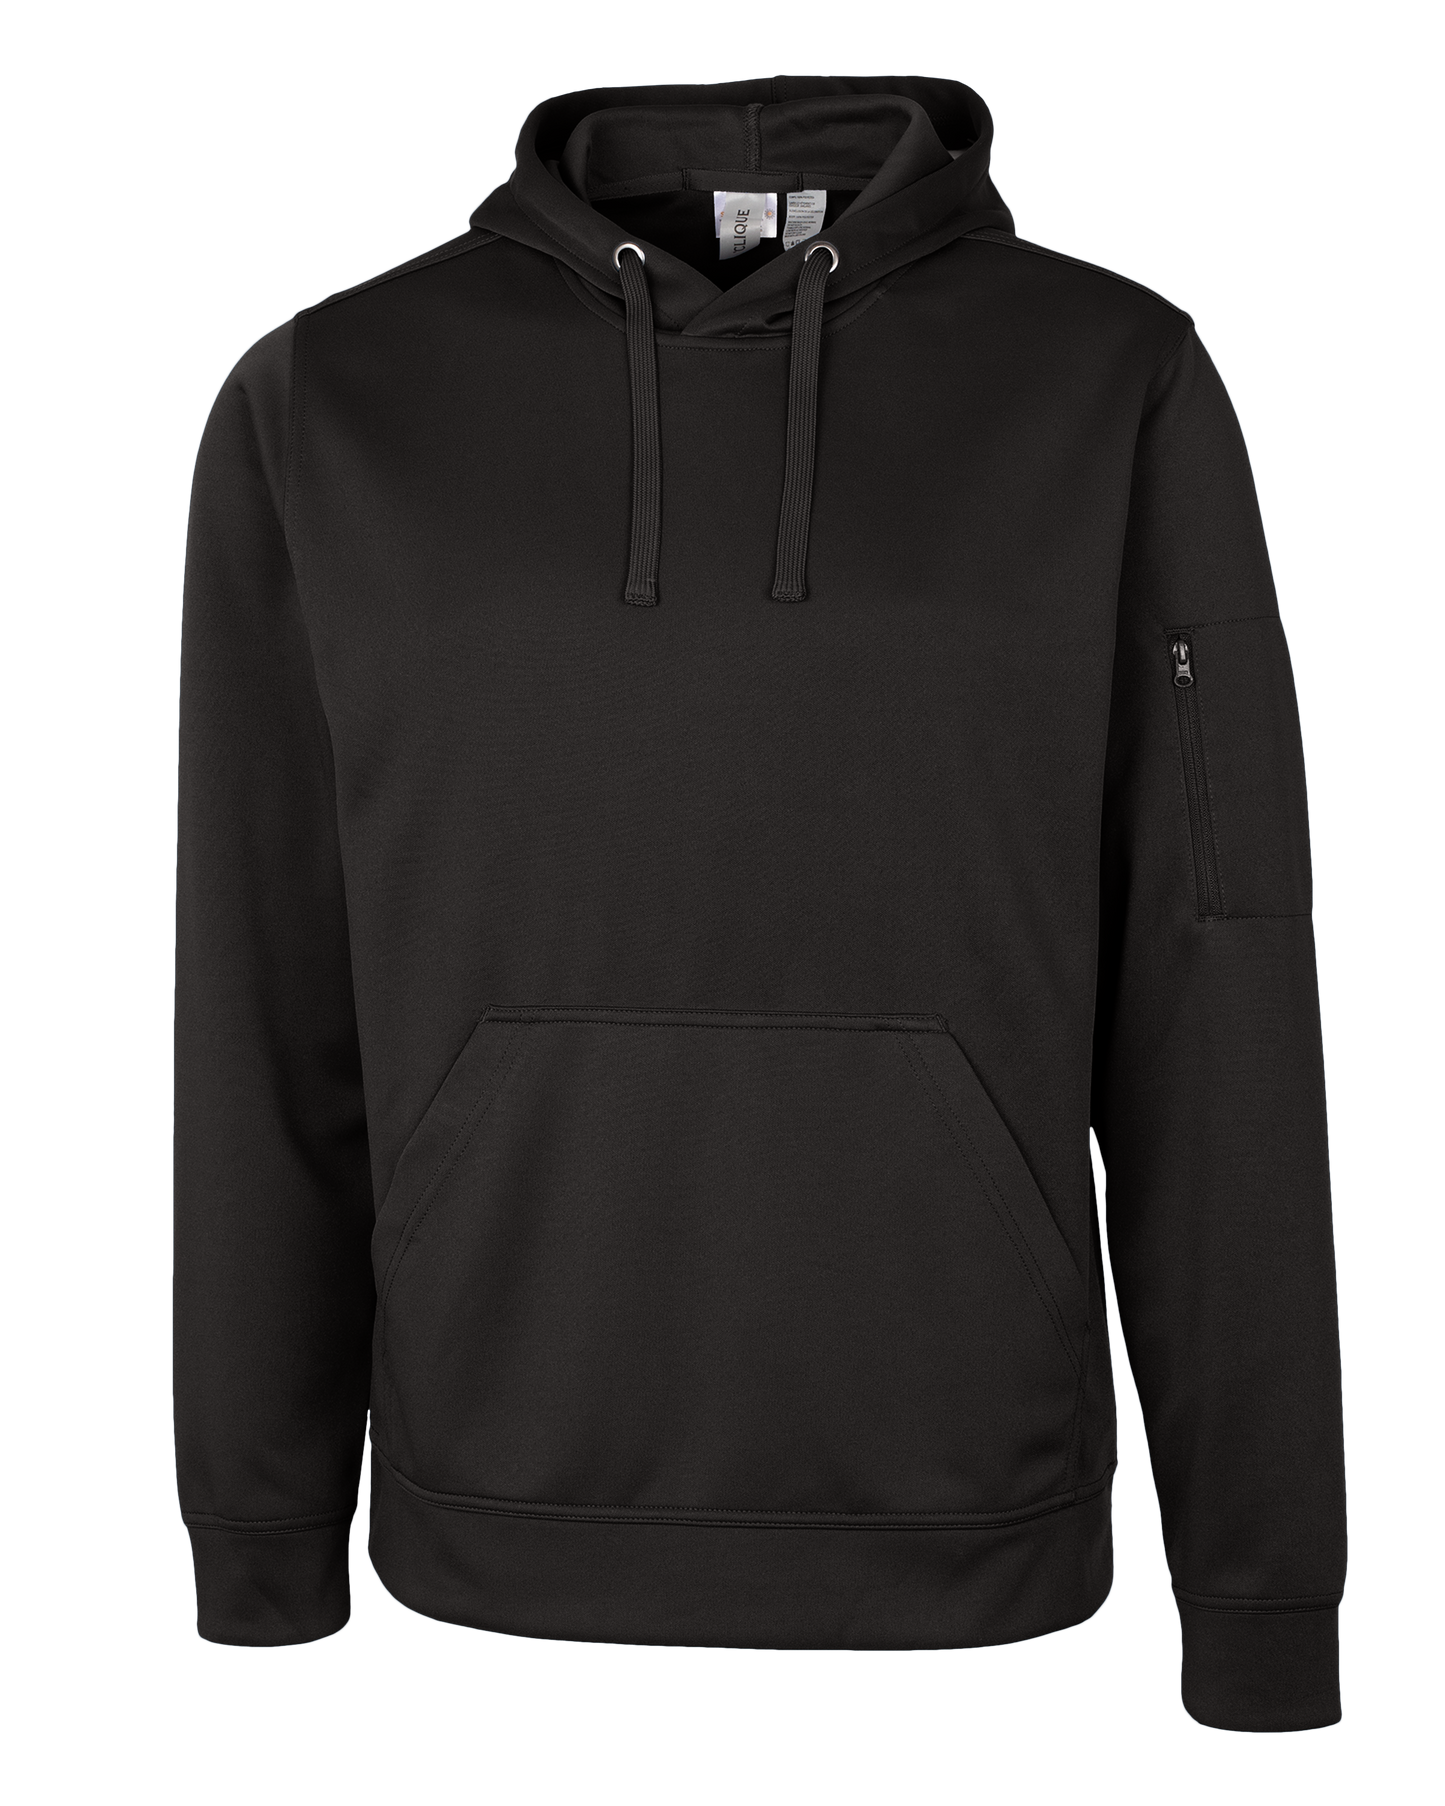 Performance Unisex Pullover Hoodie - MQK00105